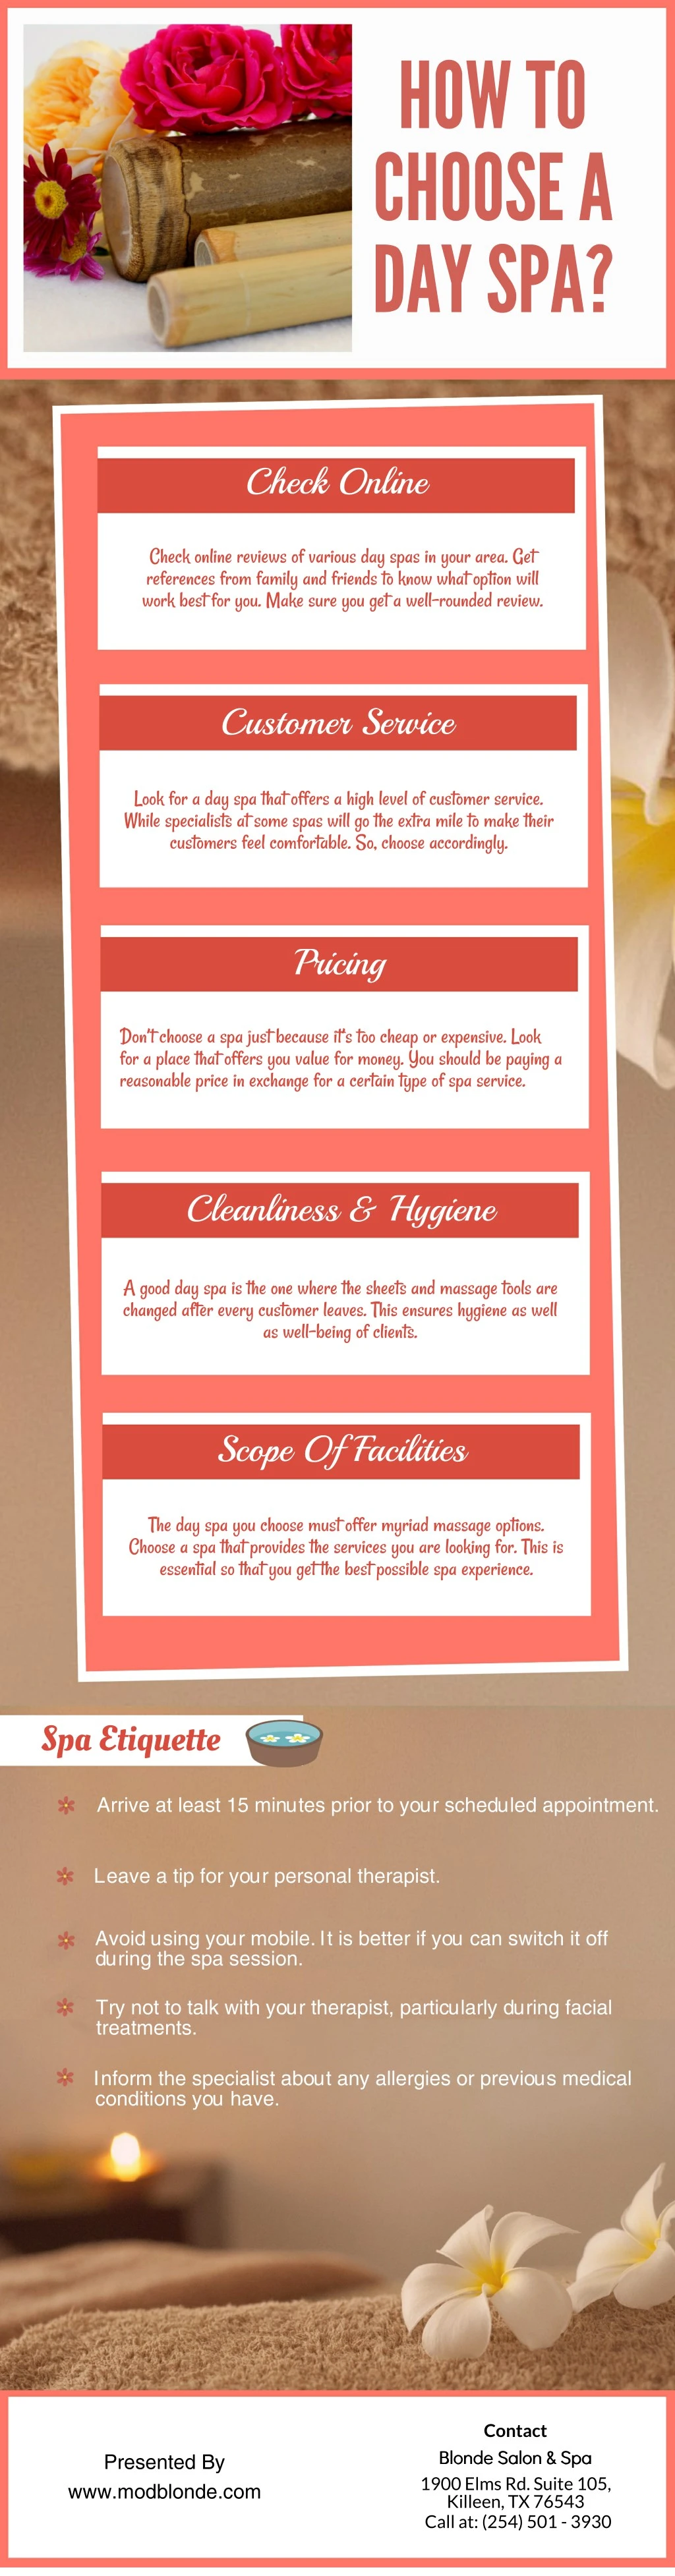 how to choose a day spa